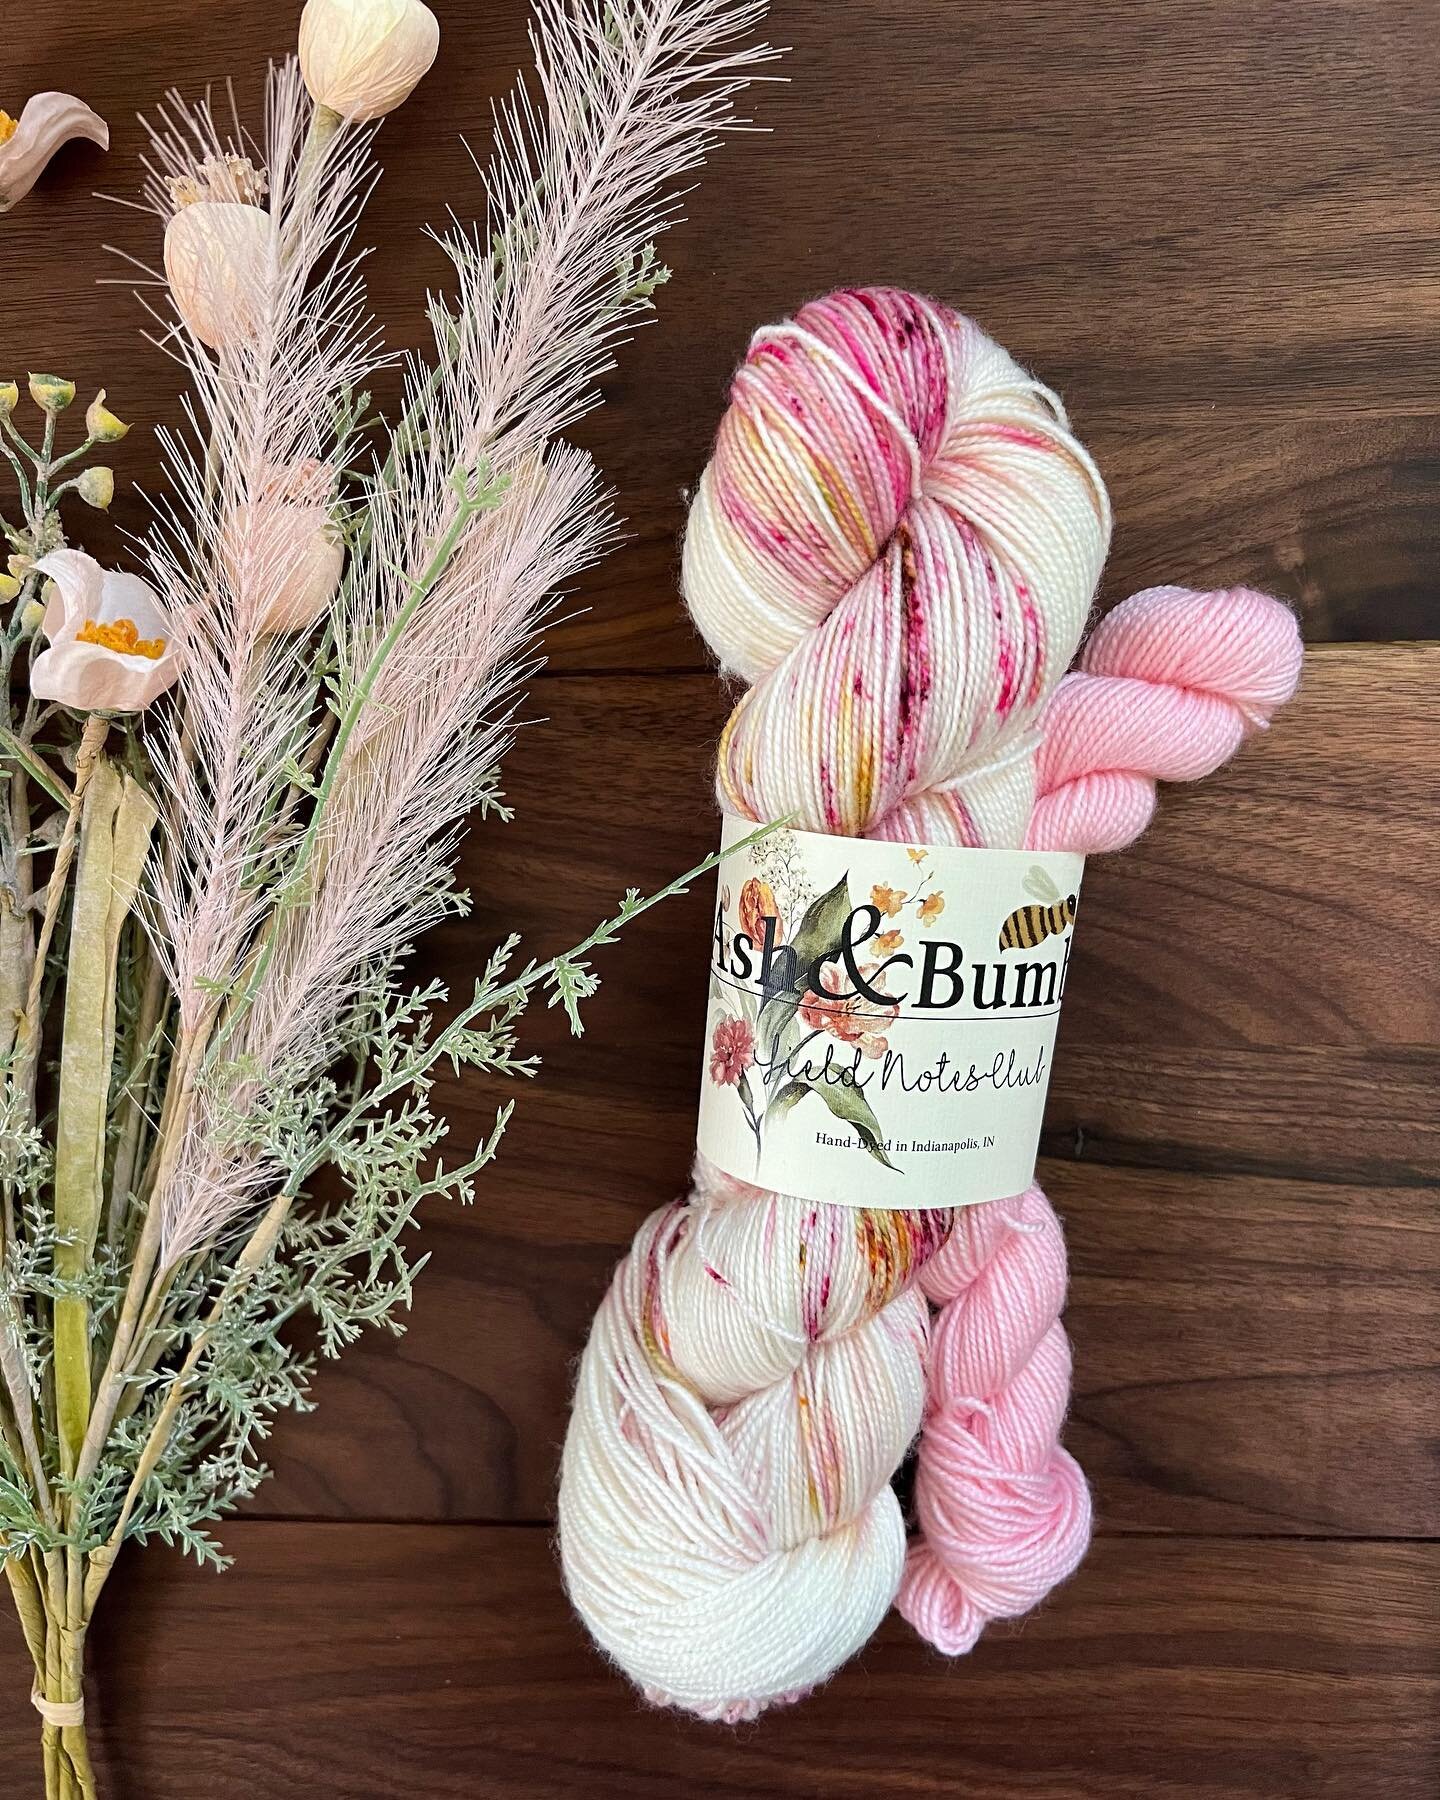 May&rsquo;s colorway for Ash &amp; Bumble&rsquo;s Field Notes Club is | Apple Blossom!

Apple Blossom has natural cream base with pink, yellow, and green speckles. 

I have paired this gorgeous colorway with the semisolid Blossom - a light bubblegum 